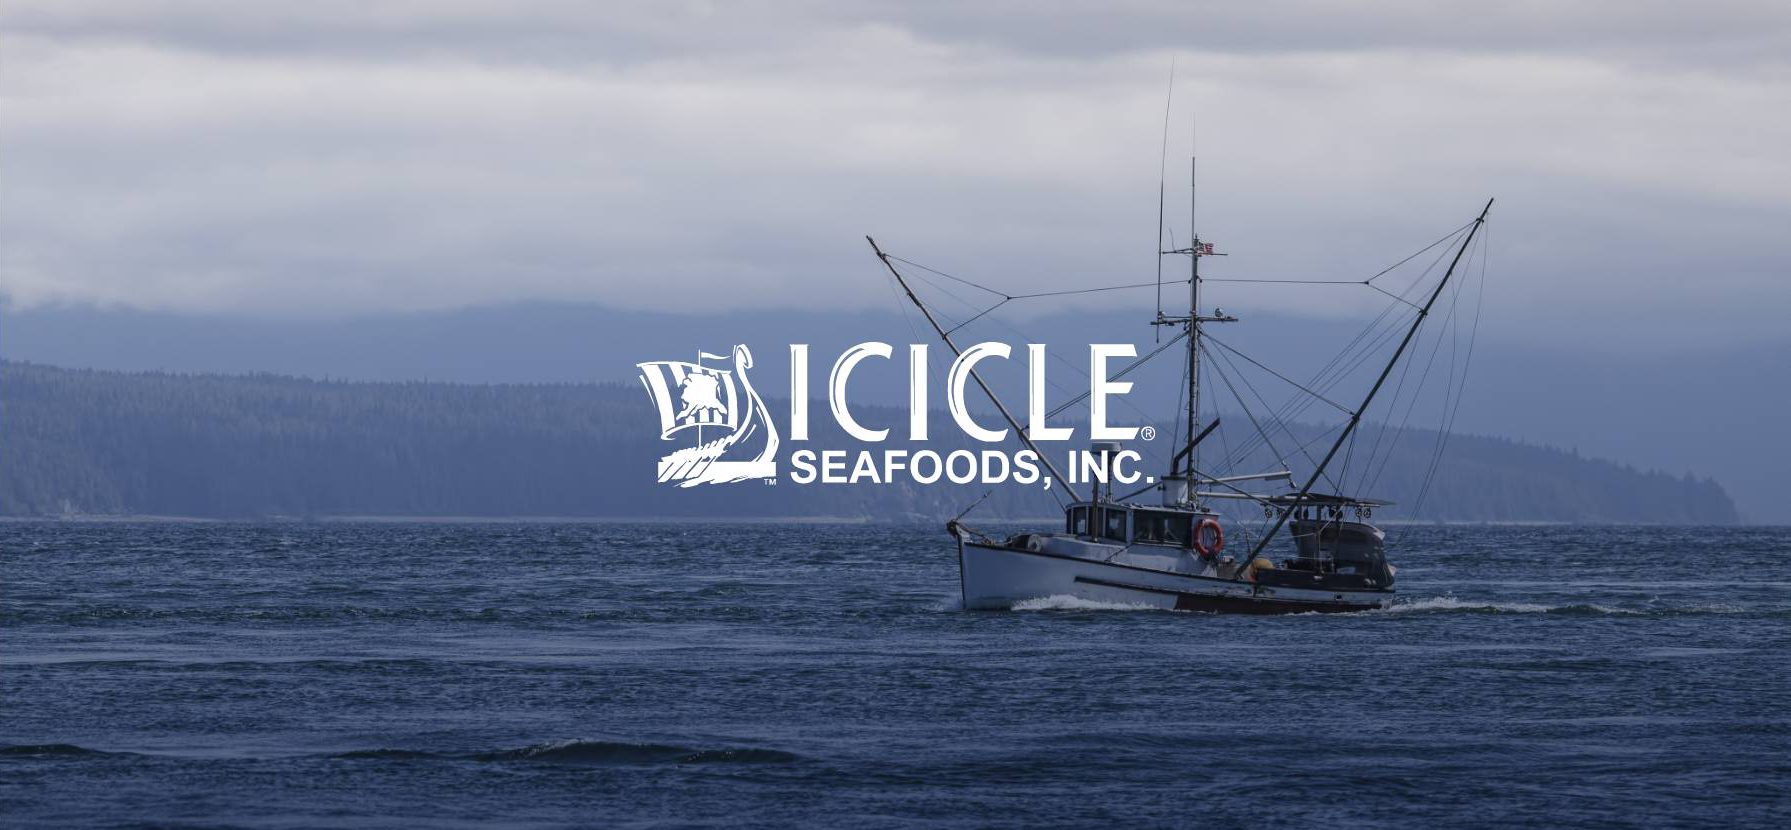 Paine & Partners Enters into Agreements to Sell Icicle Seafoods@2x